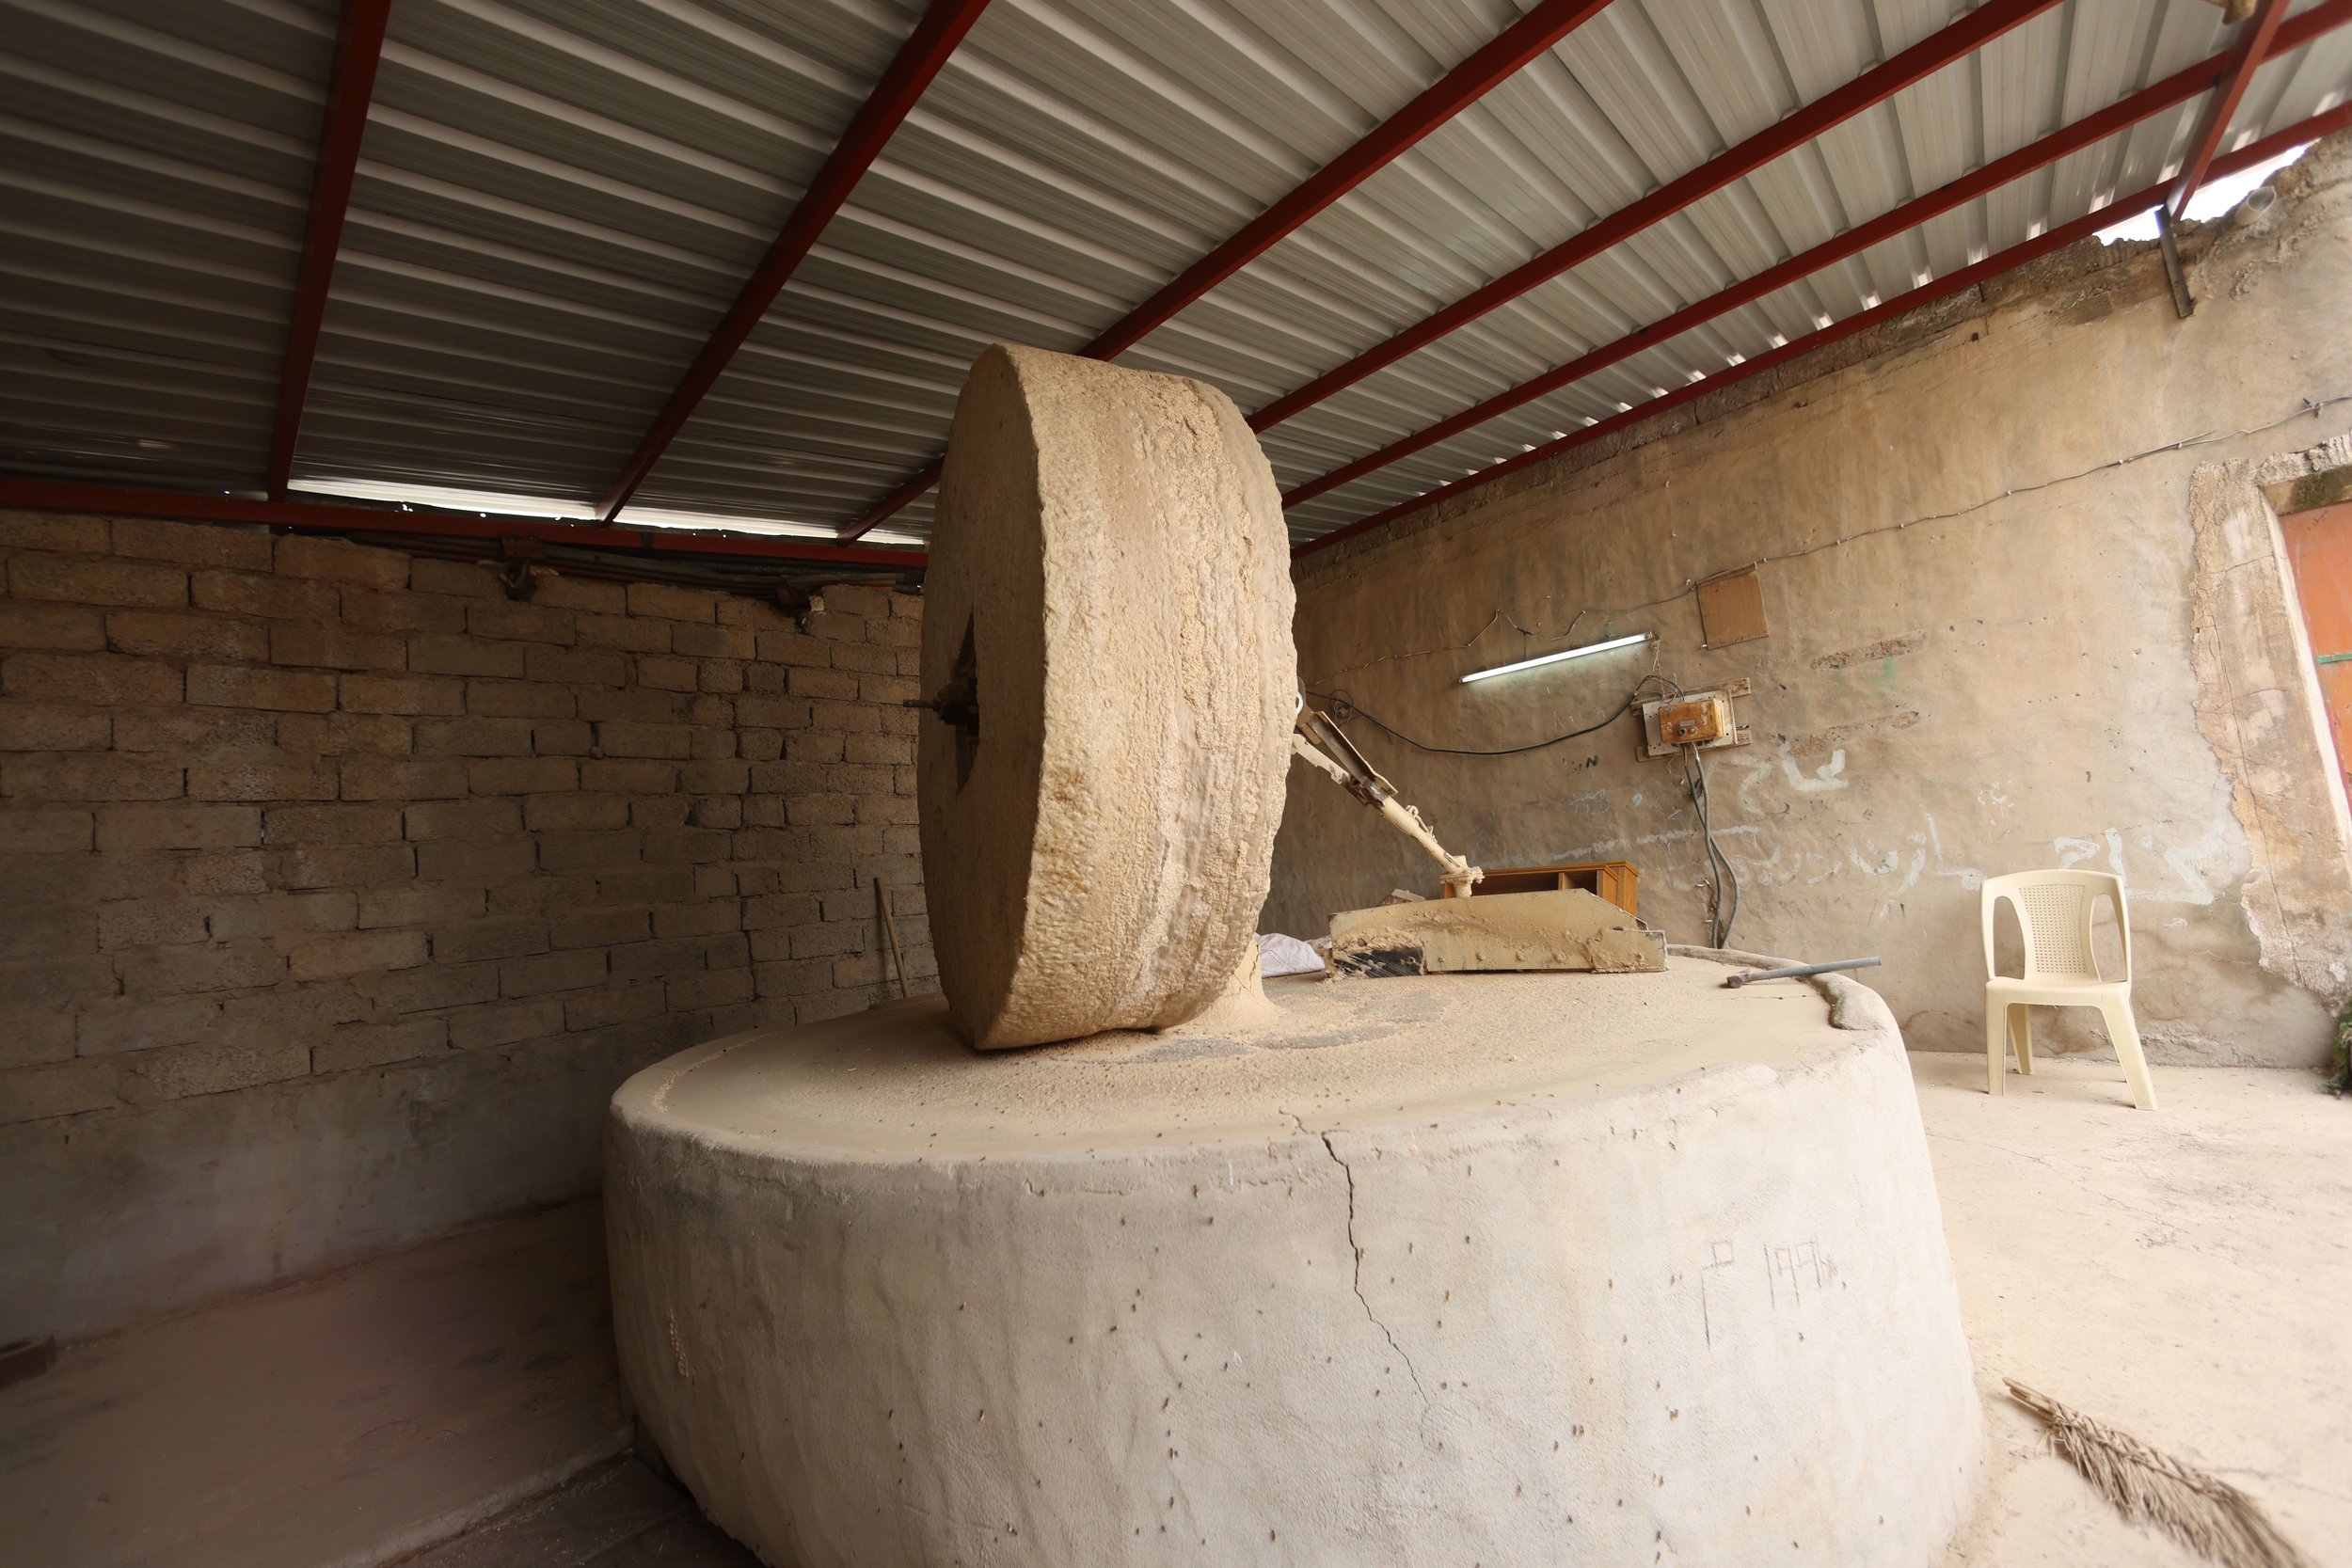  Villagers use the time-honored method of stone milling for grinding grains.  